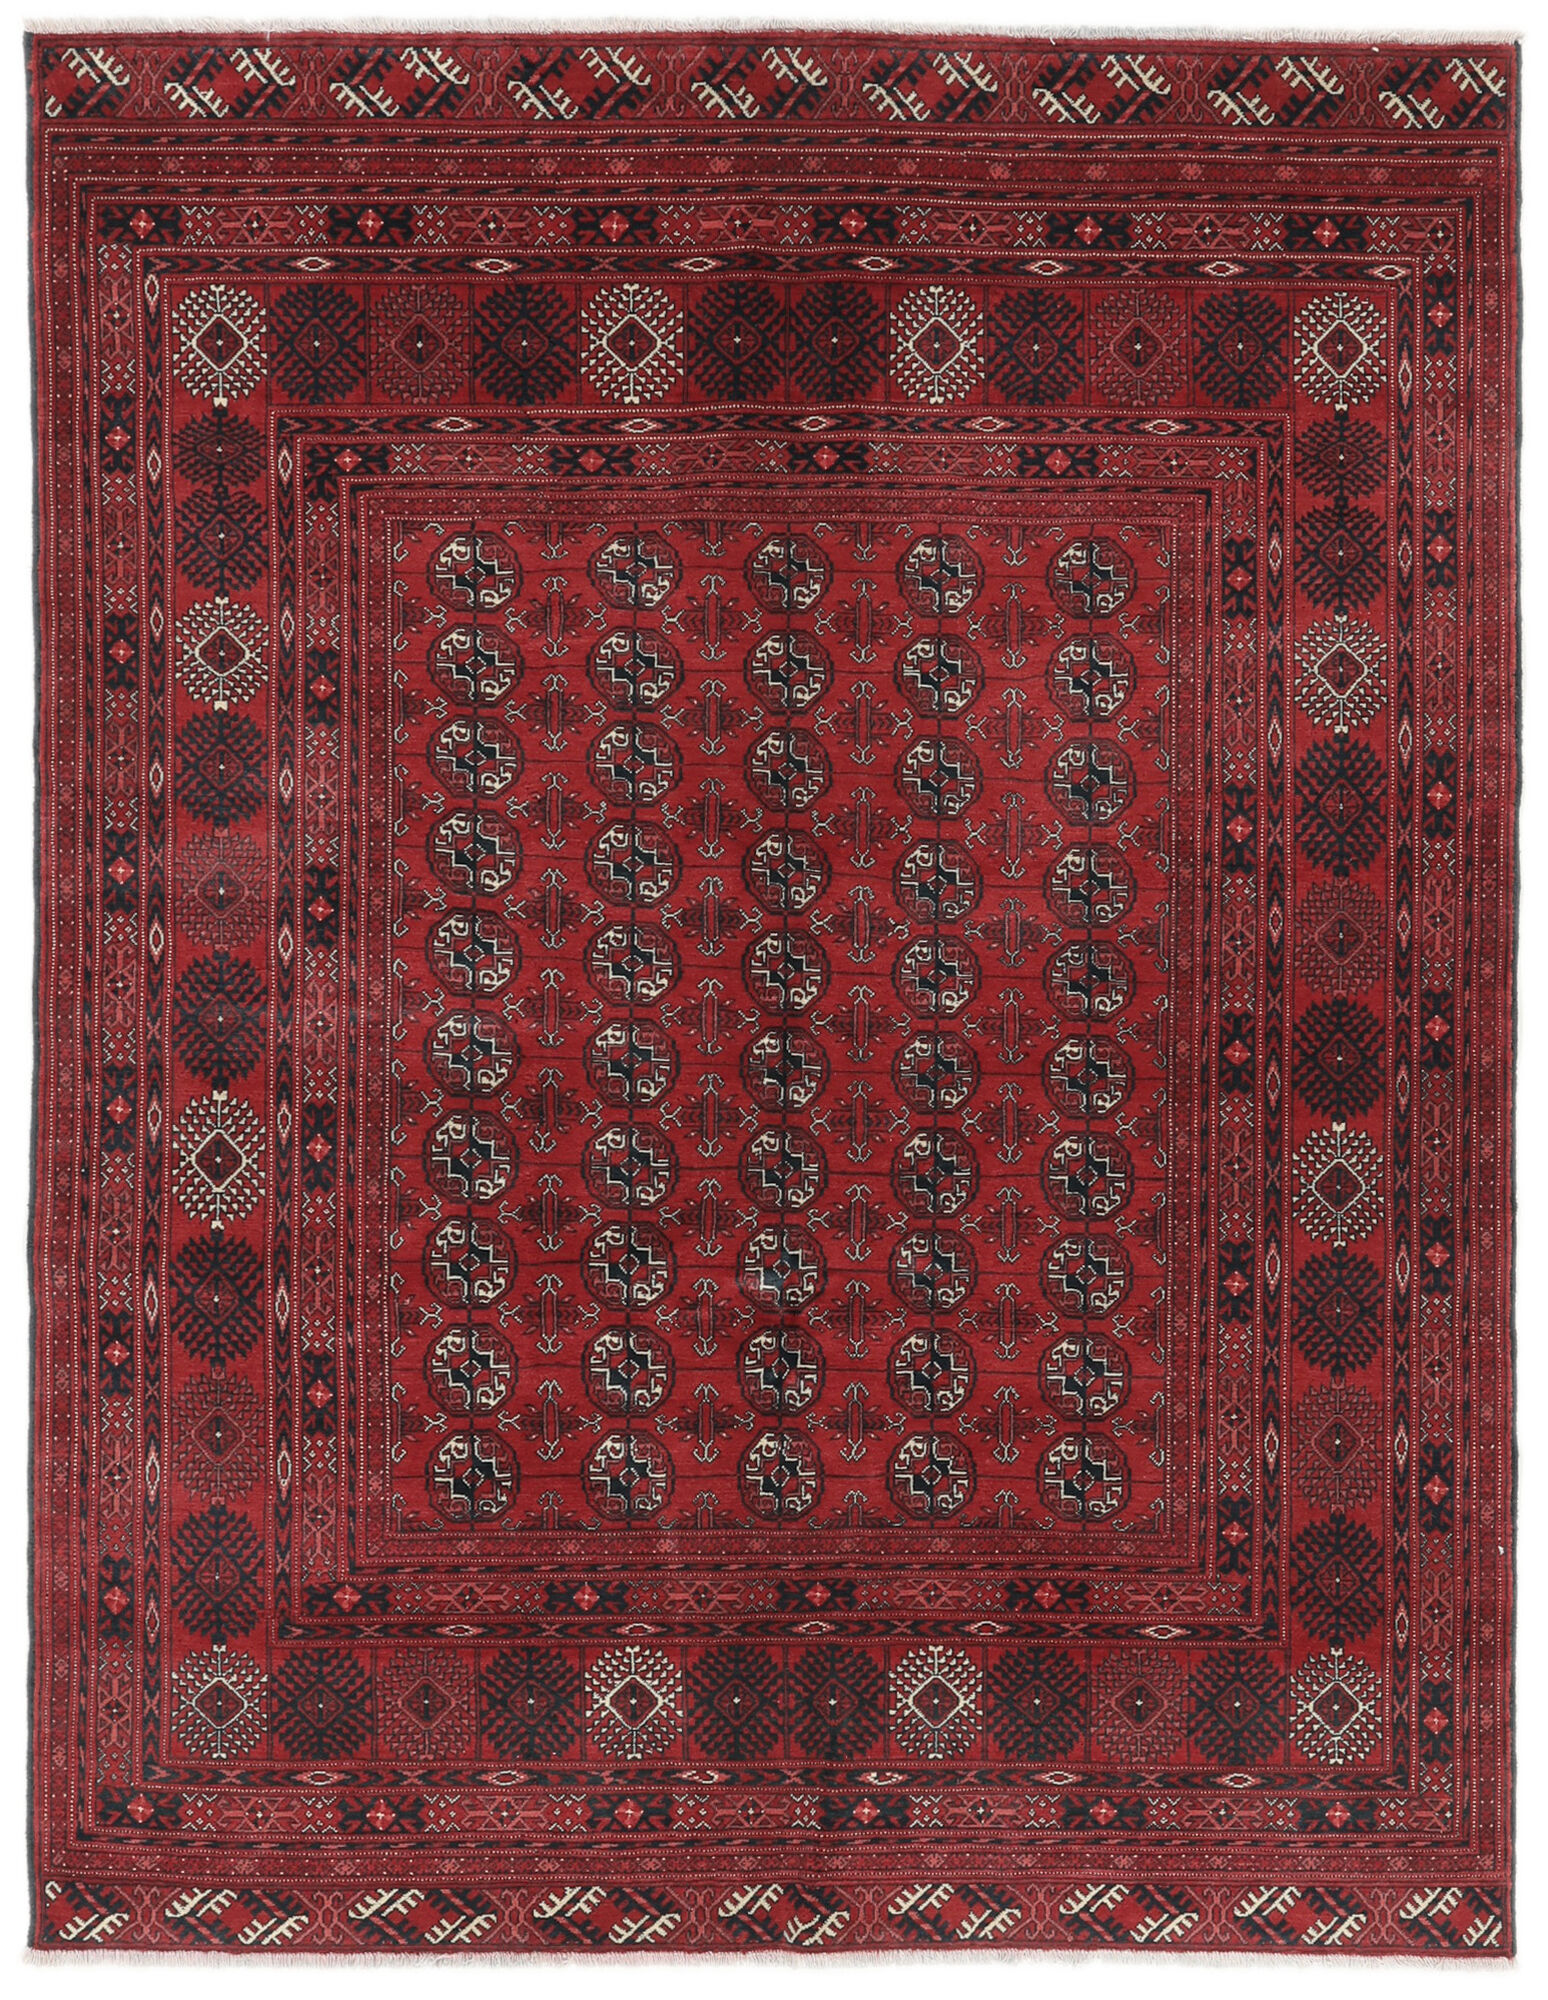 Annodato a mano. Provenienza: Afghanistan Classic Afghan Fine Tappeto 147x188